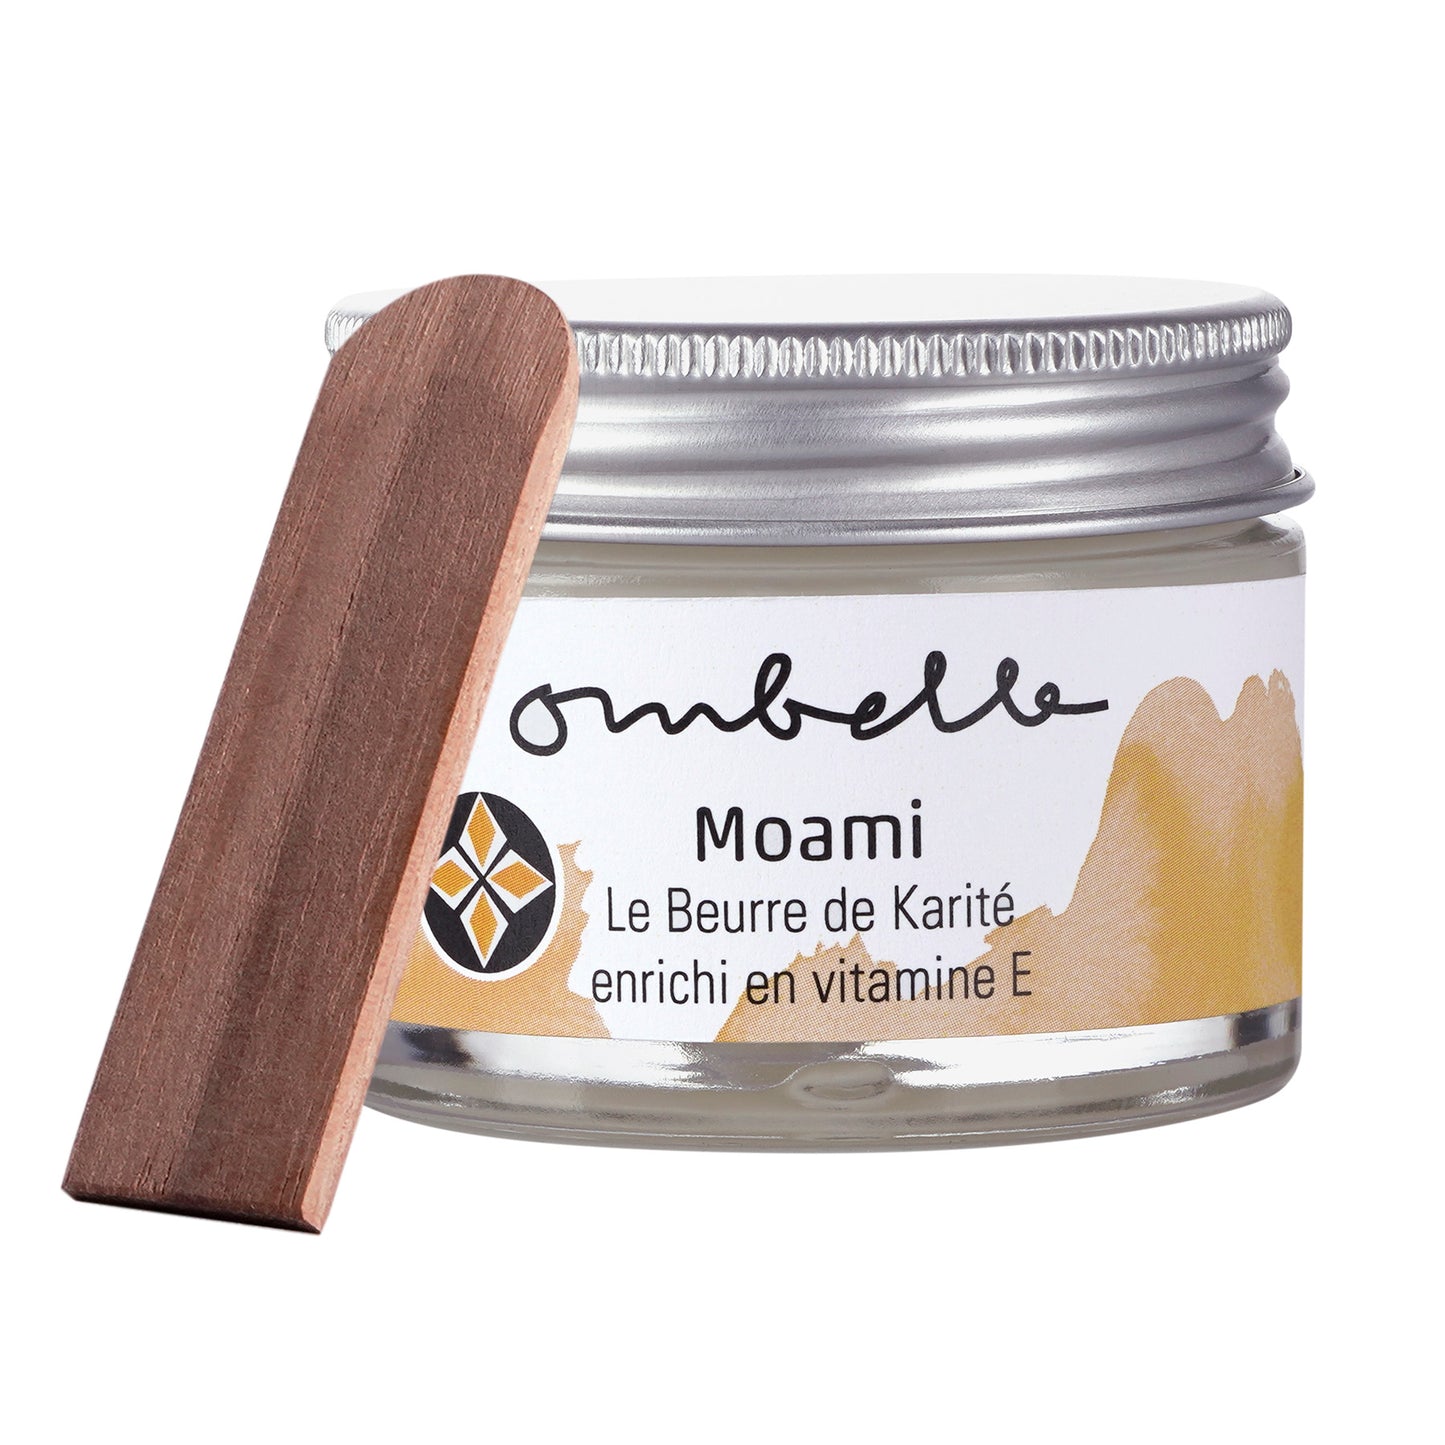 Ombelle Moami organic shea butter with vitamine E